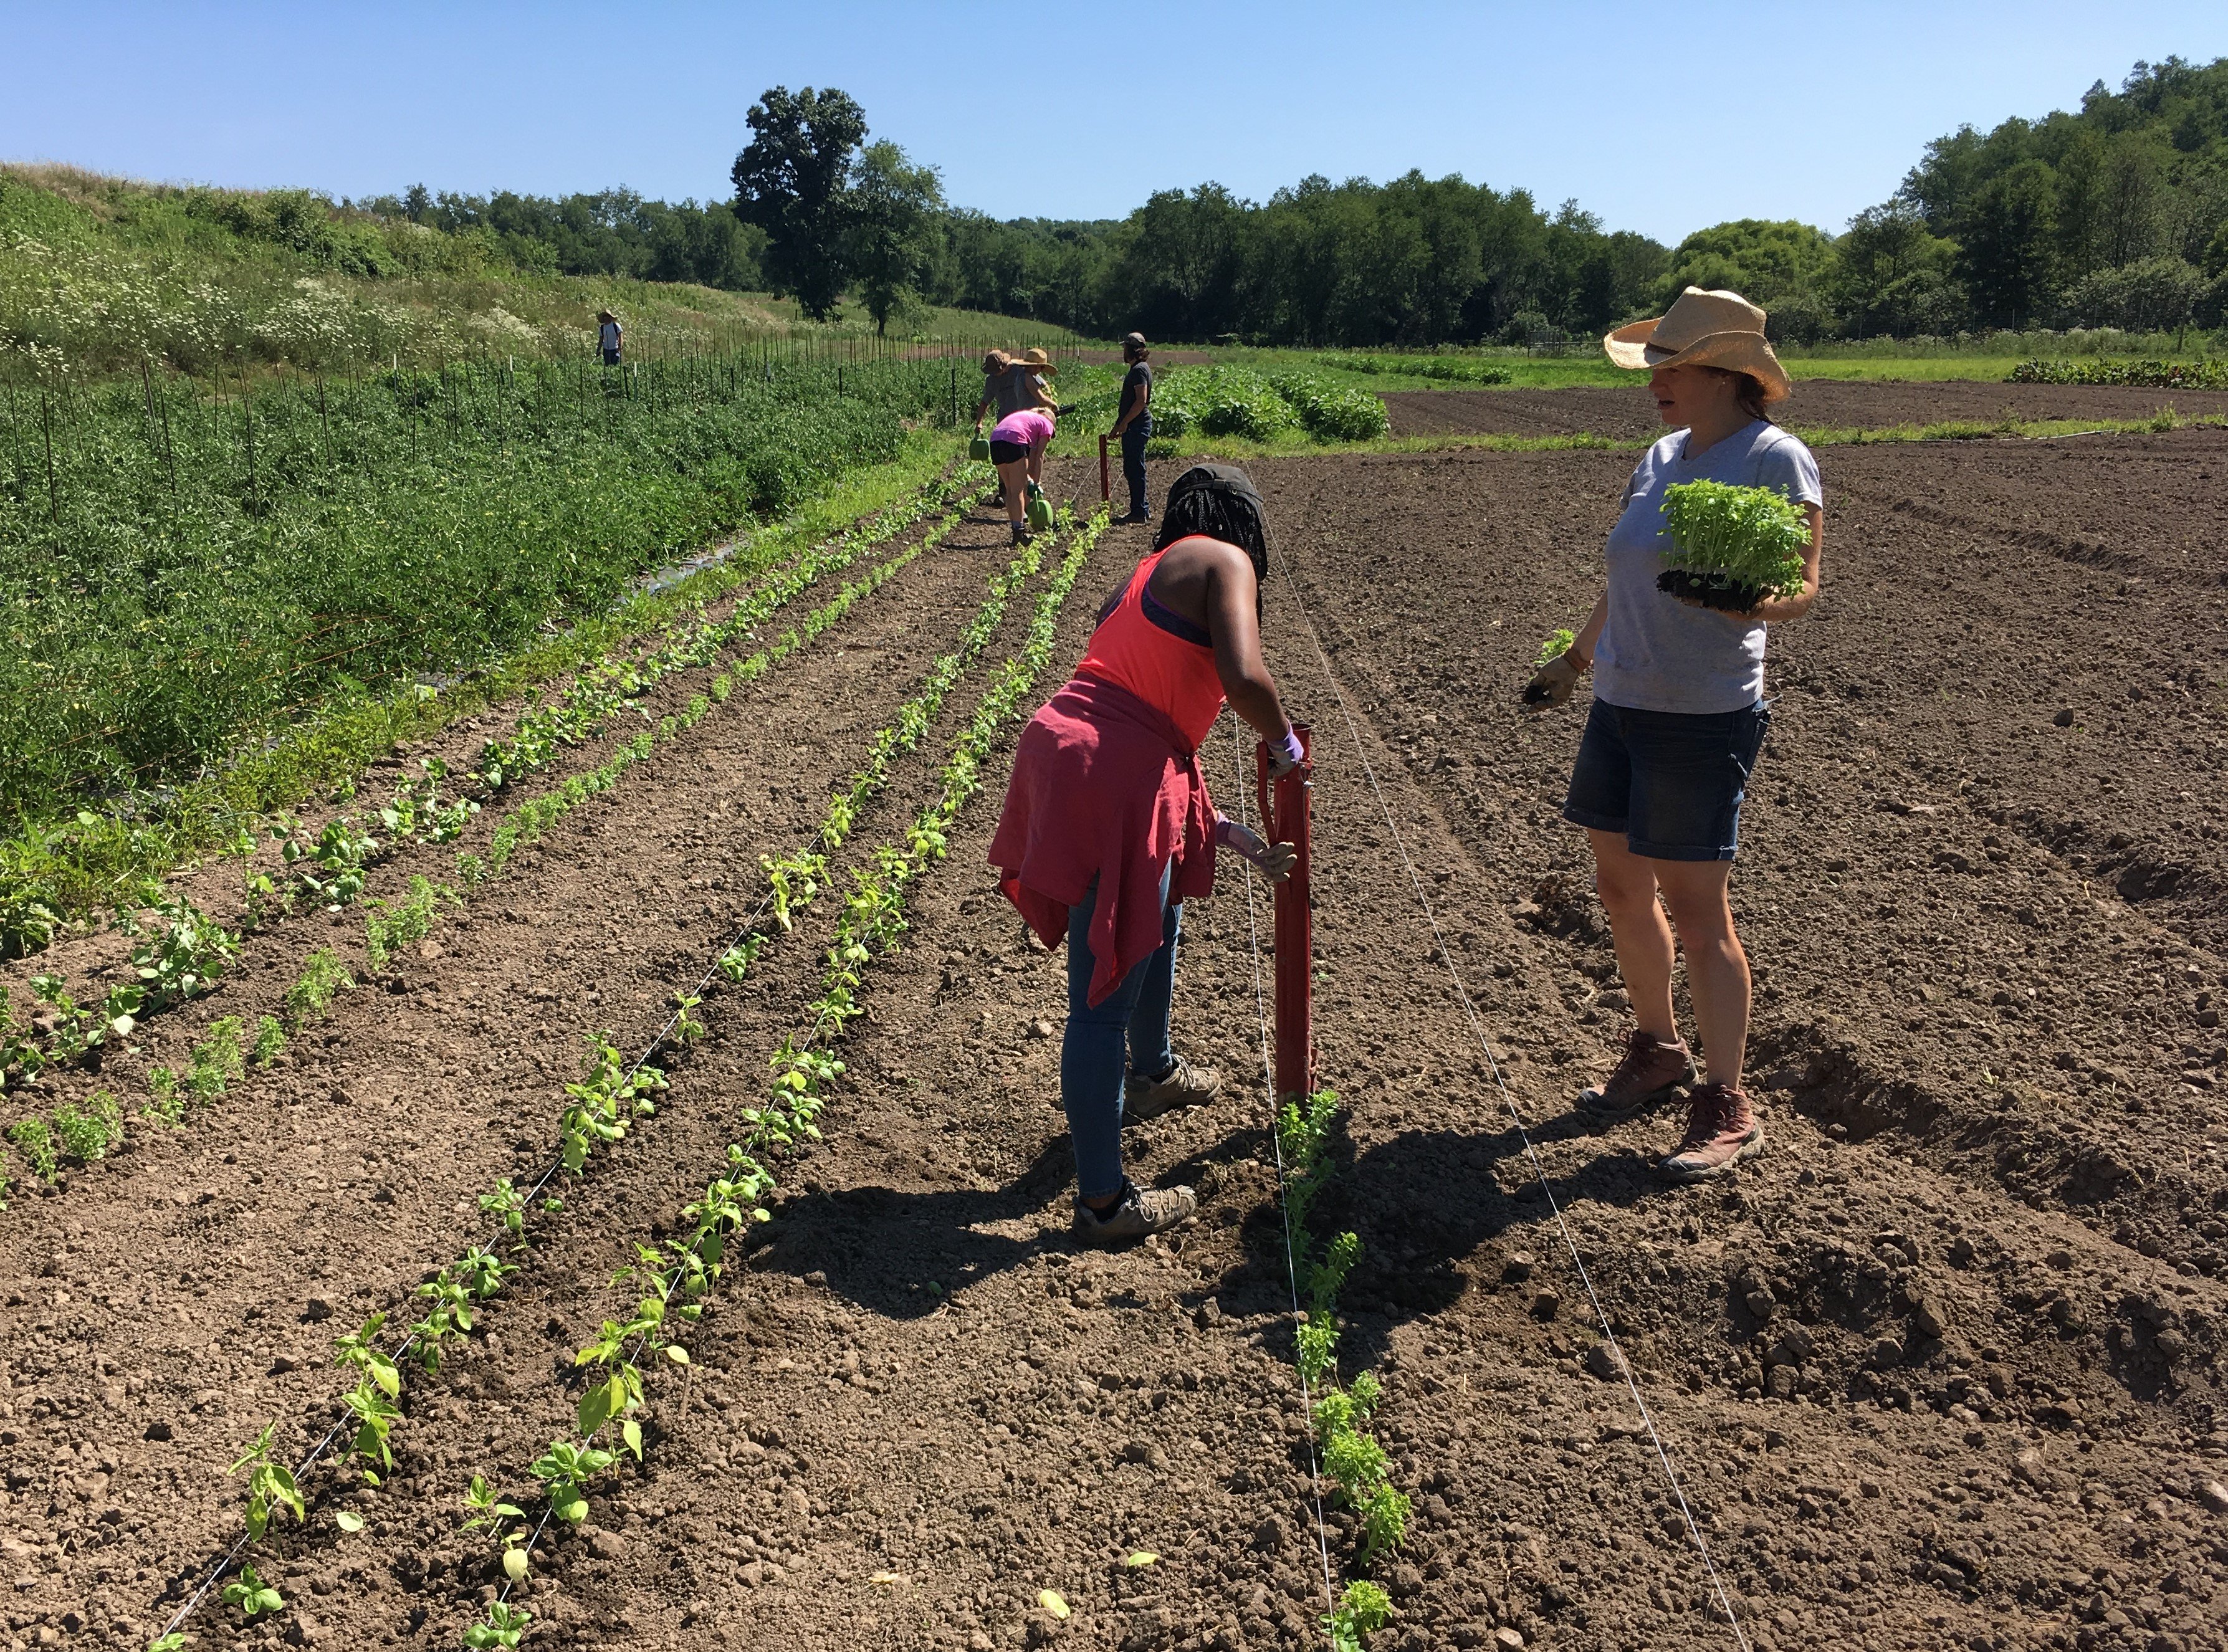 Next Happening: Rivendale Farms CSA Newsletter, Week 7 (July 24)